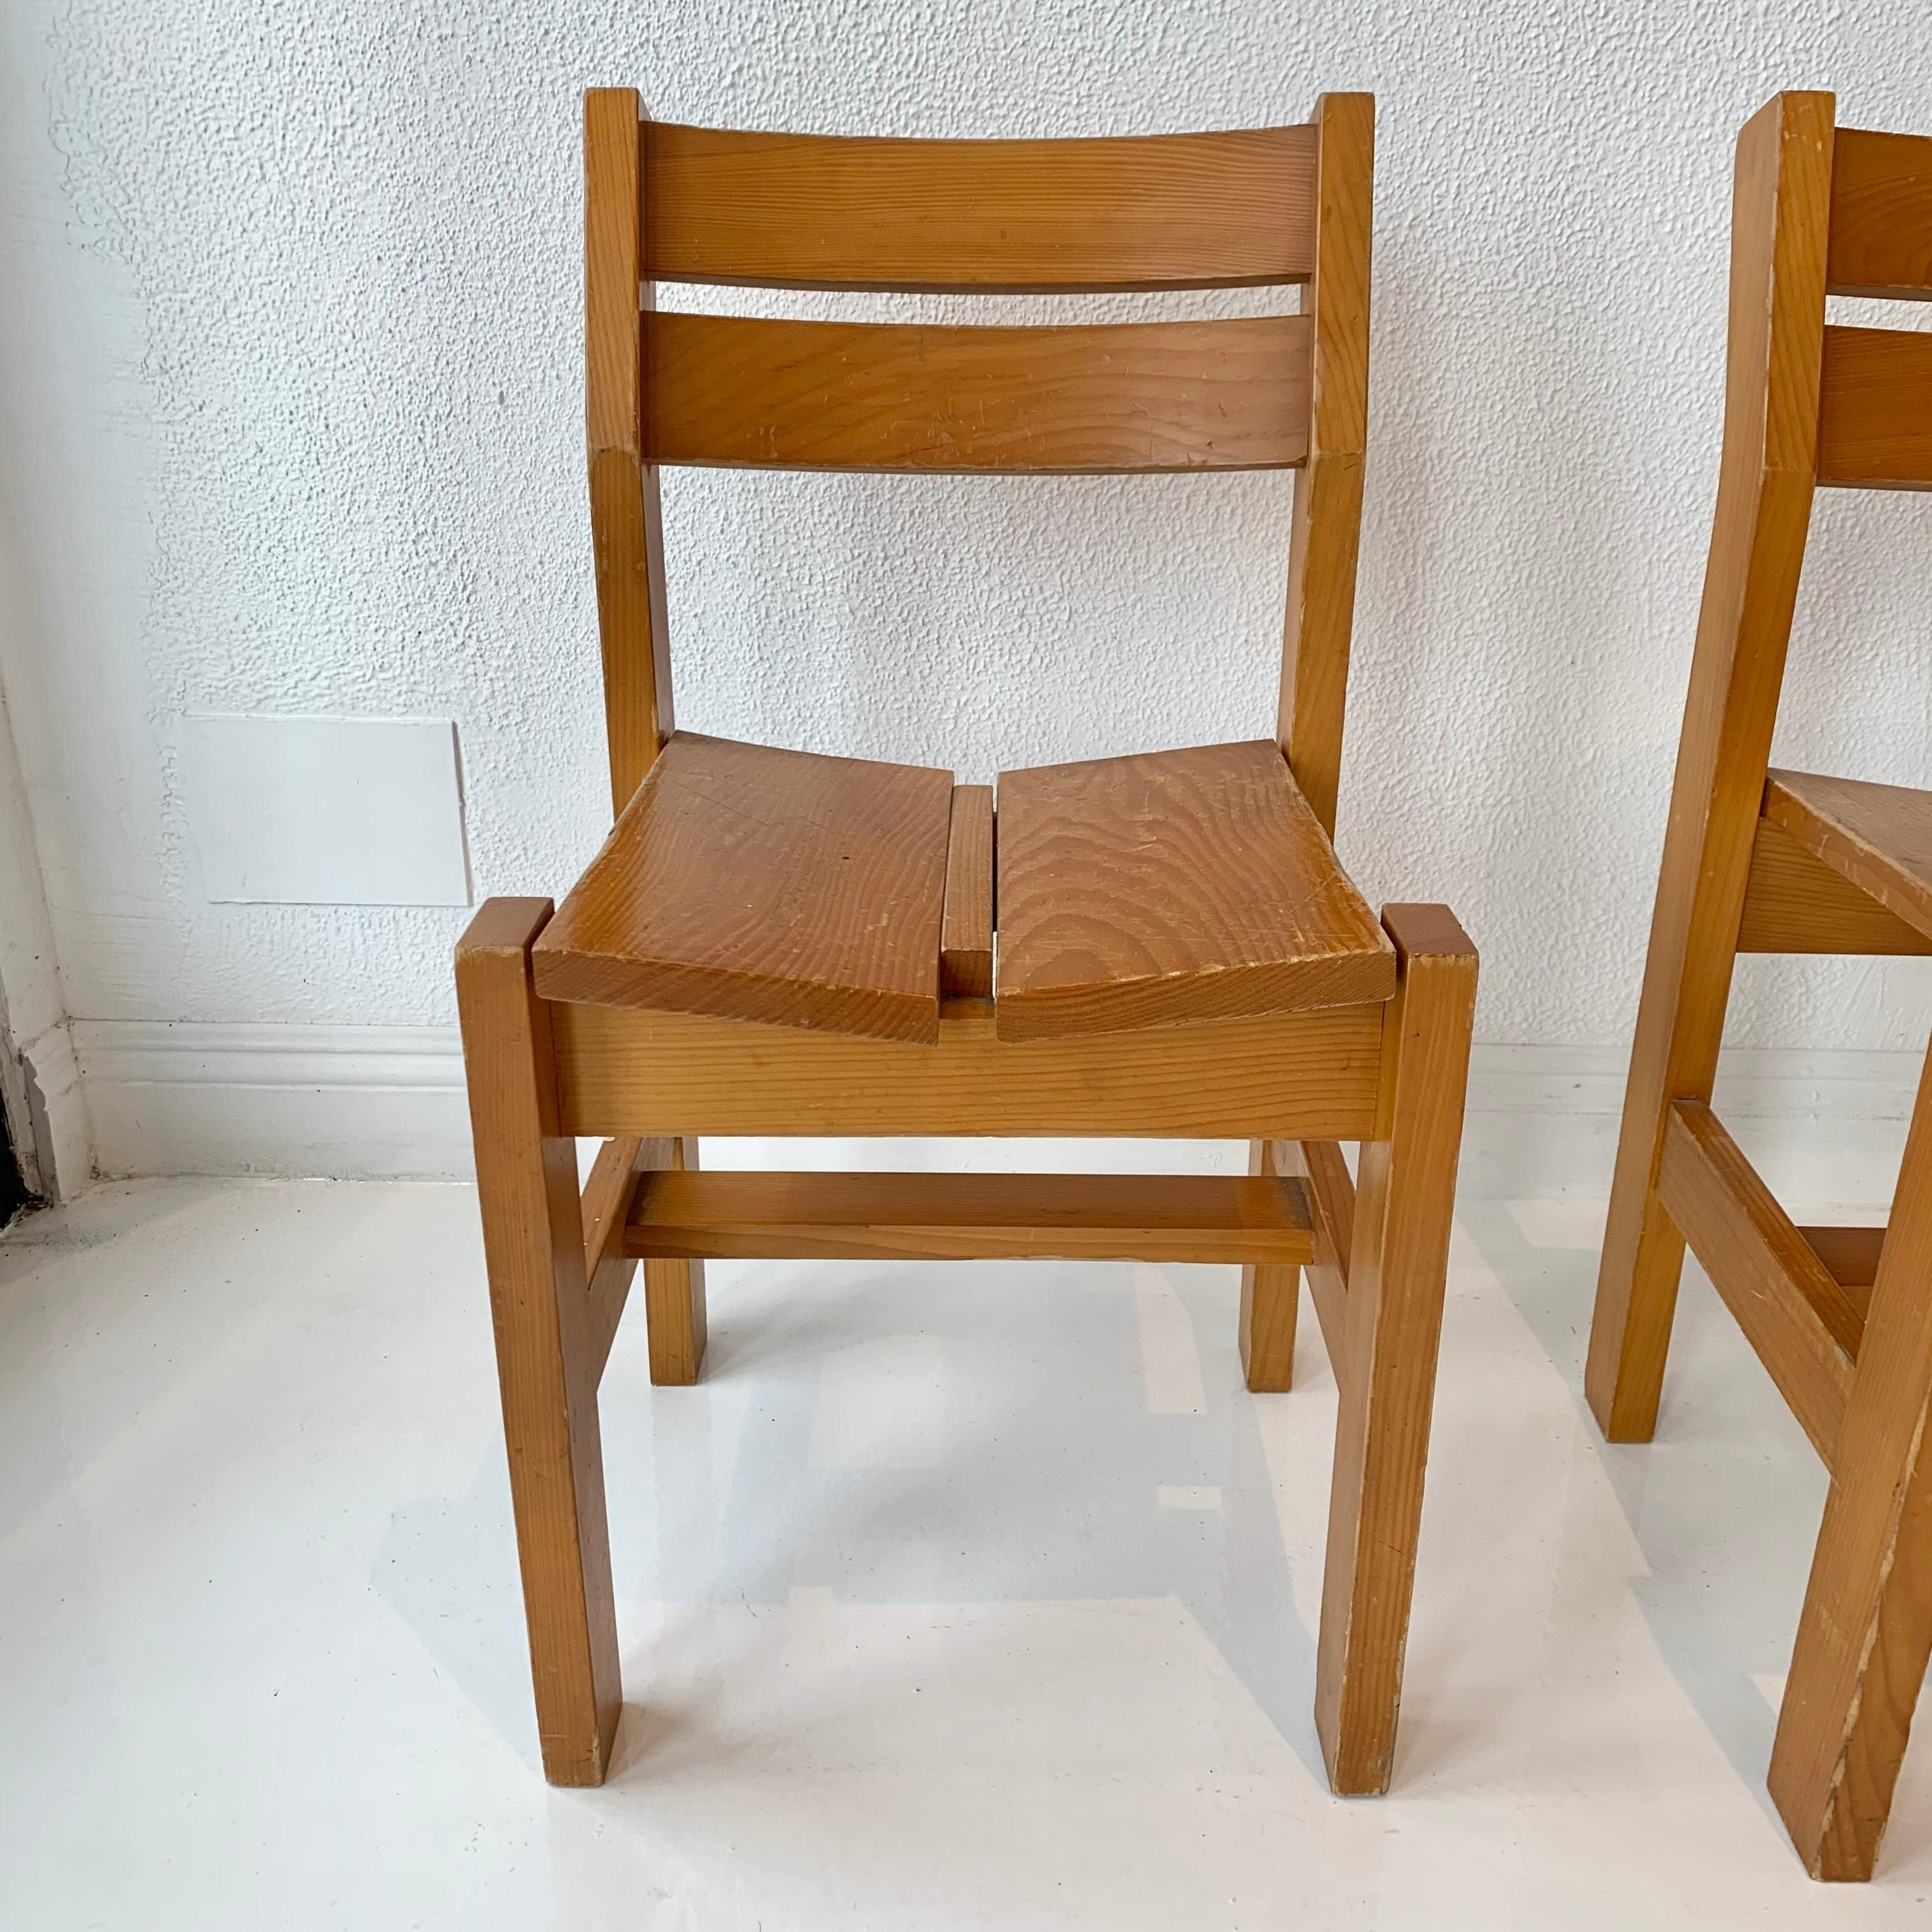 Pine Charlotte Perriand Chairs from 